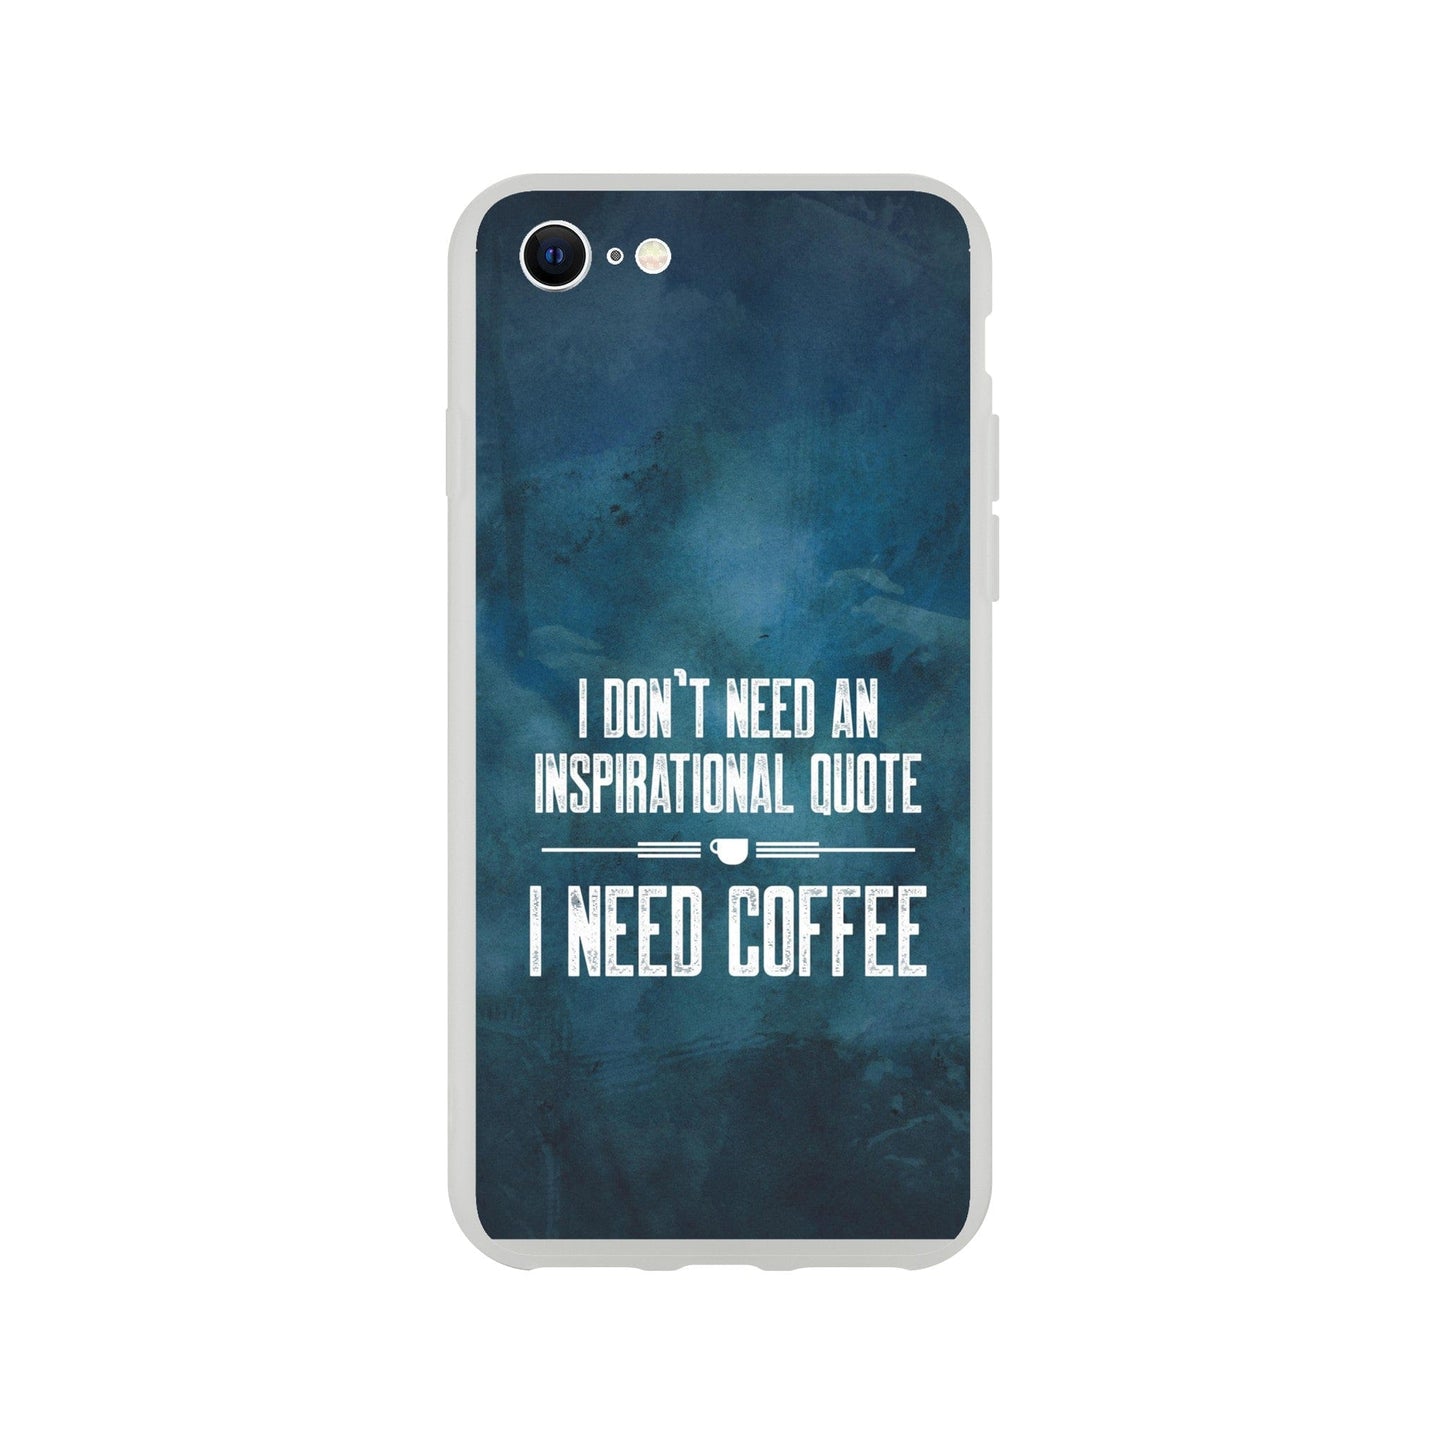 Good Bean Gifts "Coffee not Quotes" Flexi Cell Phone Case iPhone 8